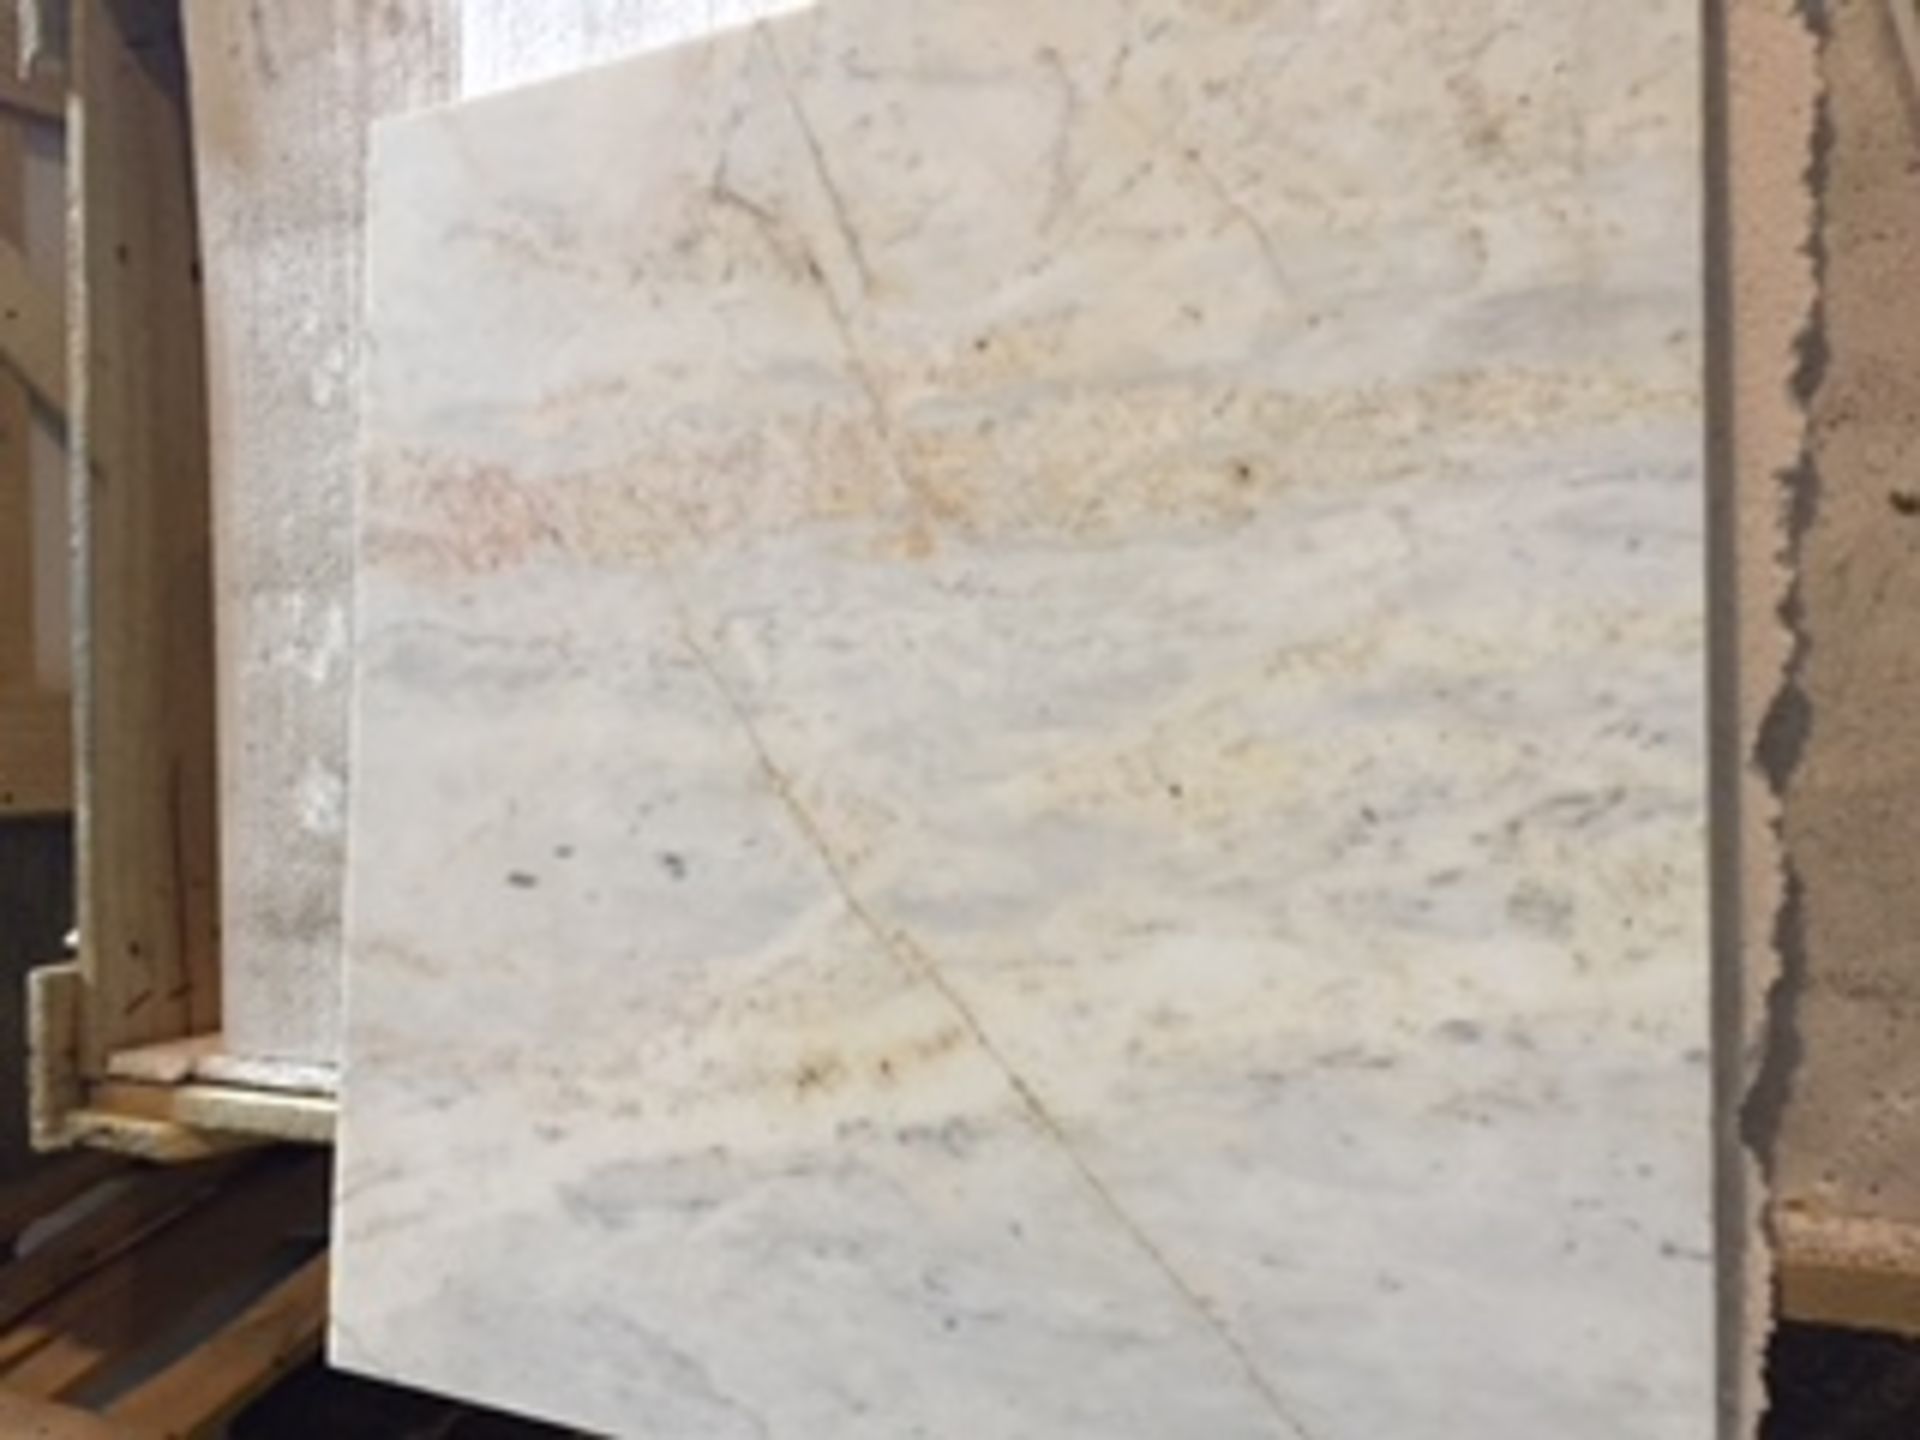 Quantity of 49 Royal Veined Marble Slabs 60cmx60cmx2 cm - Image 3 of 3